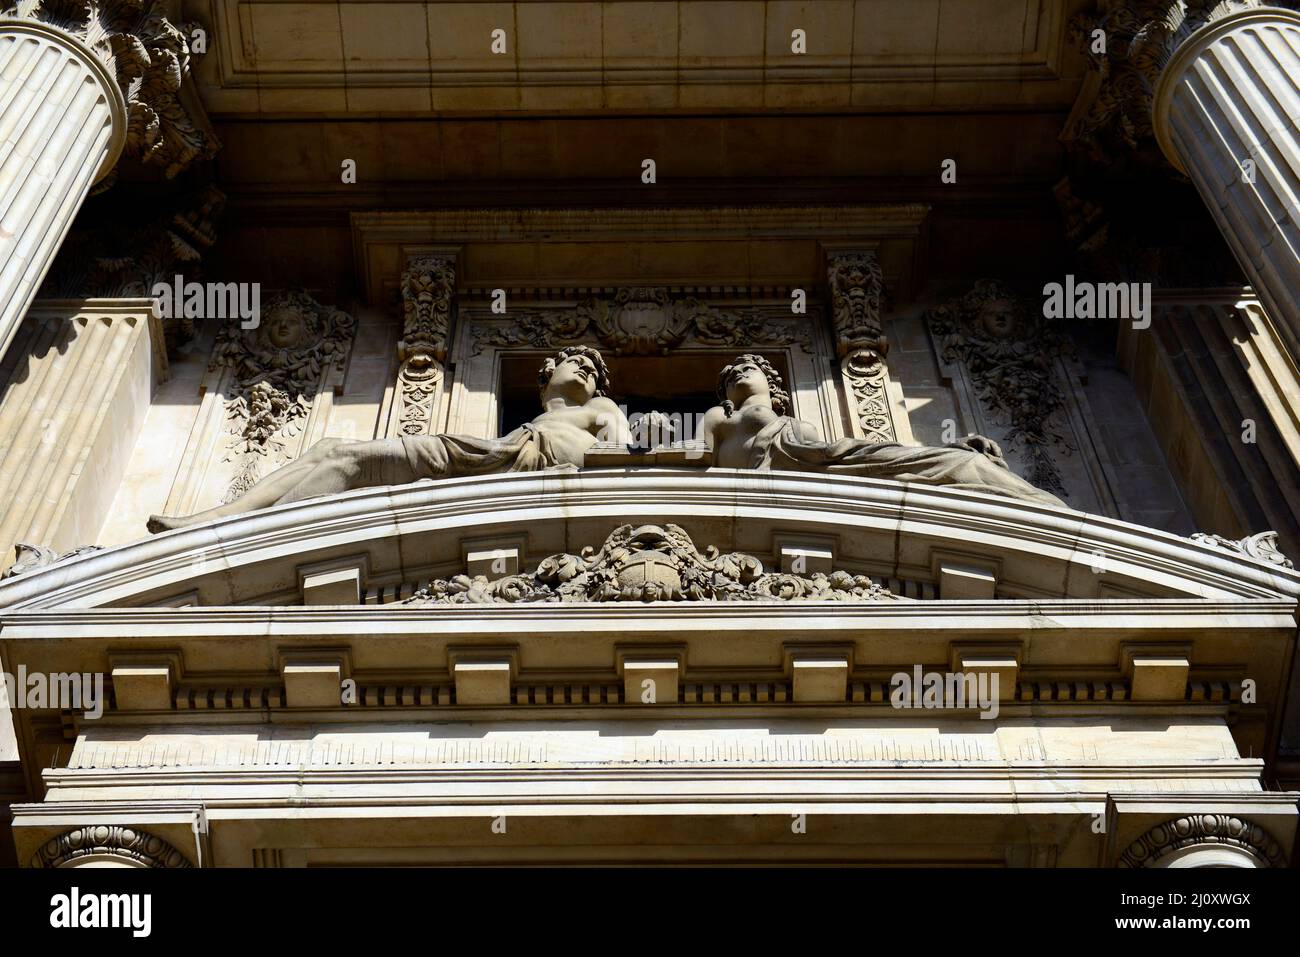 Pudence and Vigilance Sculpture on Bourse/Beurs o Brussels Stock Exchange in Belgio. Foto Stock